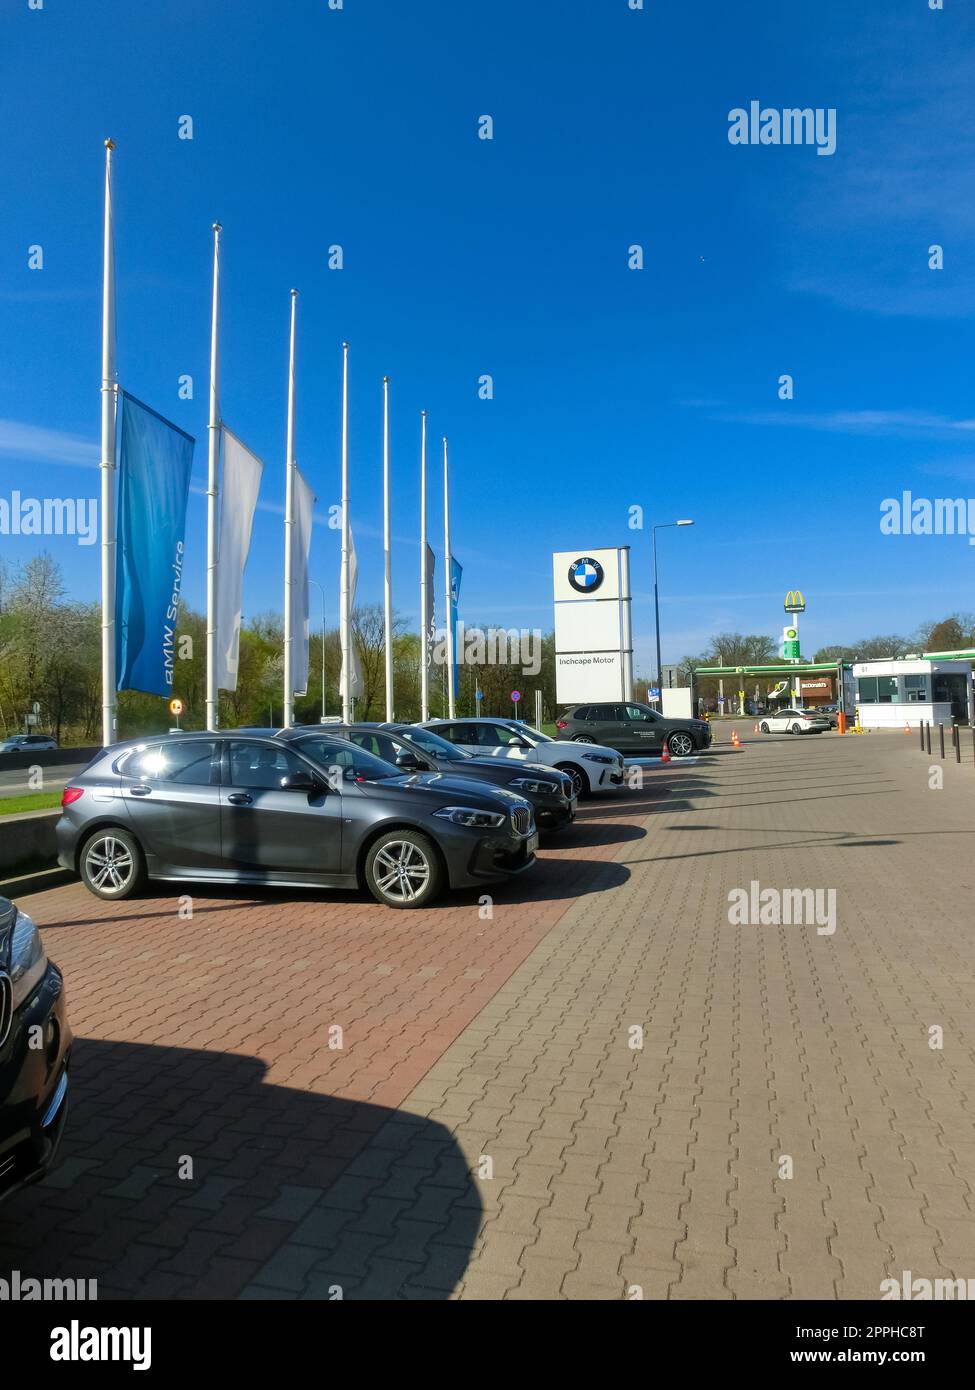 BMW car dealership with cars parked on forecourt. Stock Photo